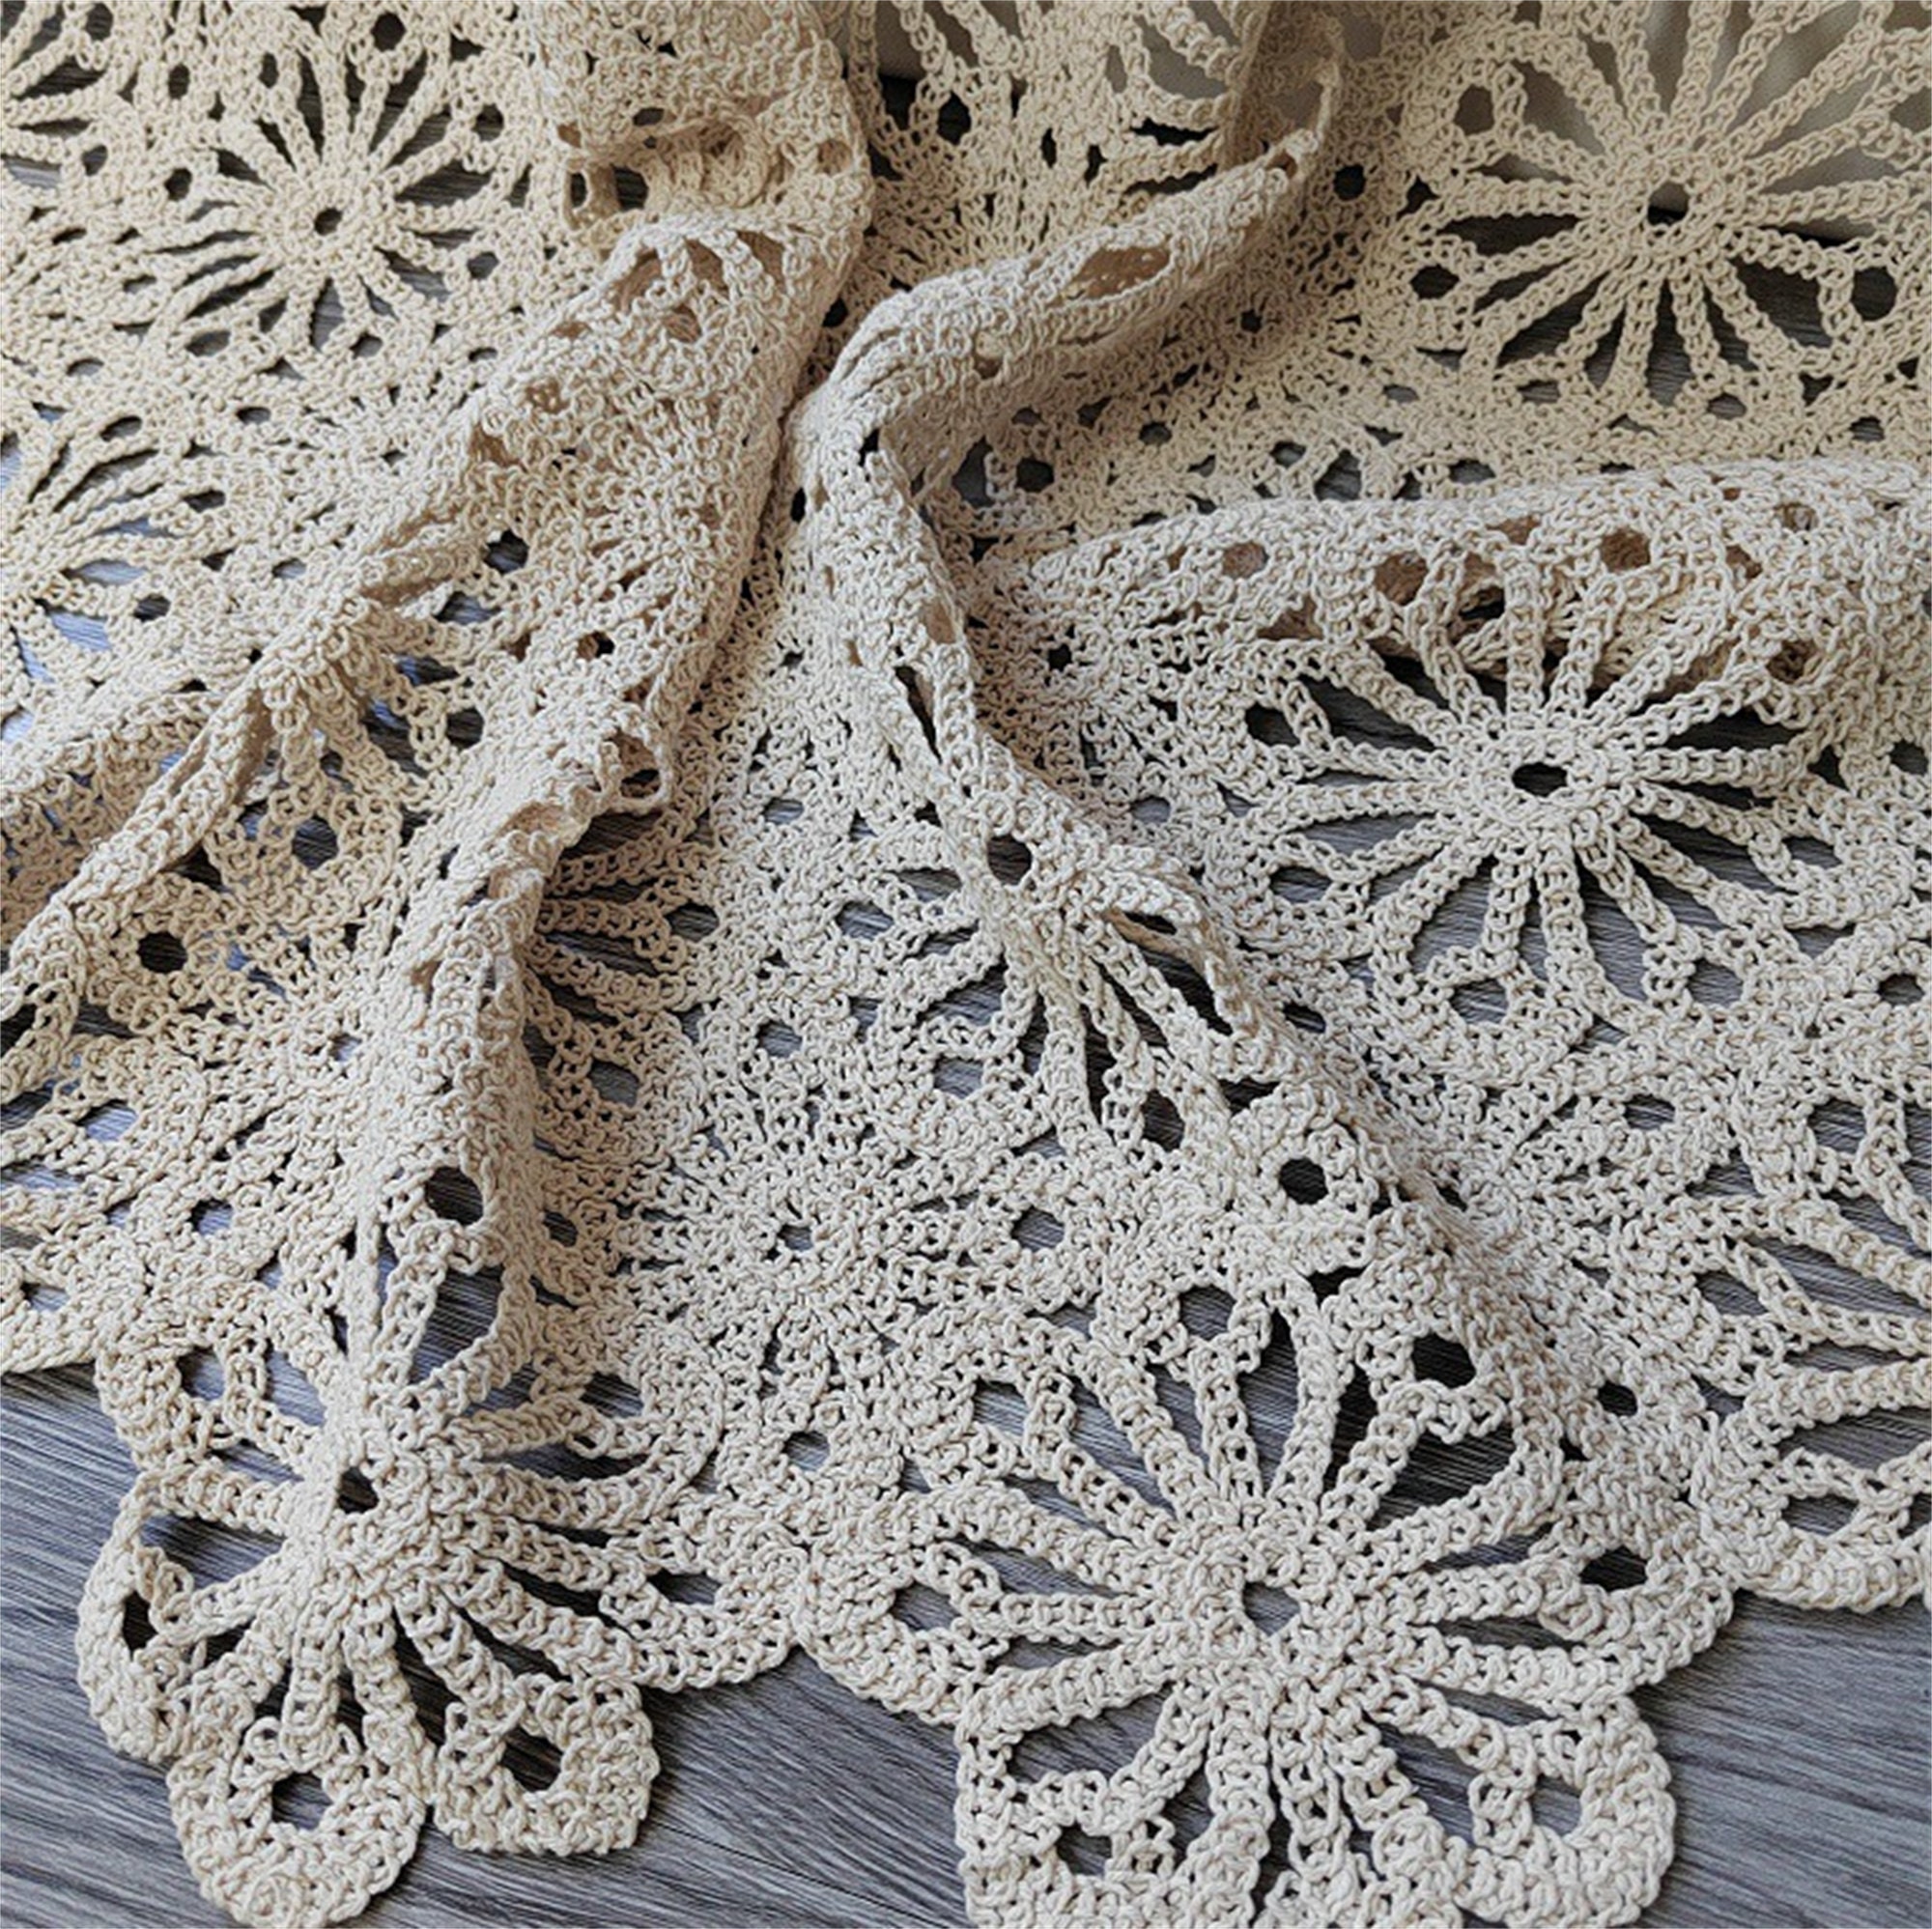 60 Yards Cotton Lace Trim for Sewing Crochet Lace Ribbon Beige Vintage Lace  Ribbon Lace Fabric Strip Sewing Lace DIY Lace Scalloped Edge for Crafts